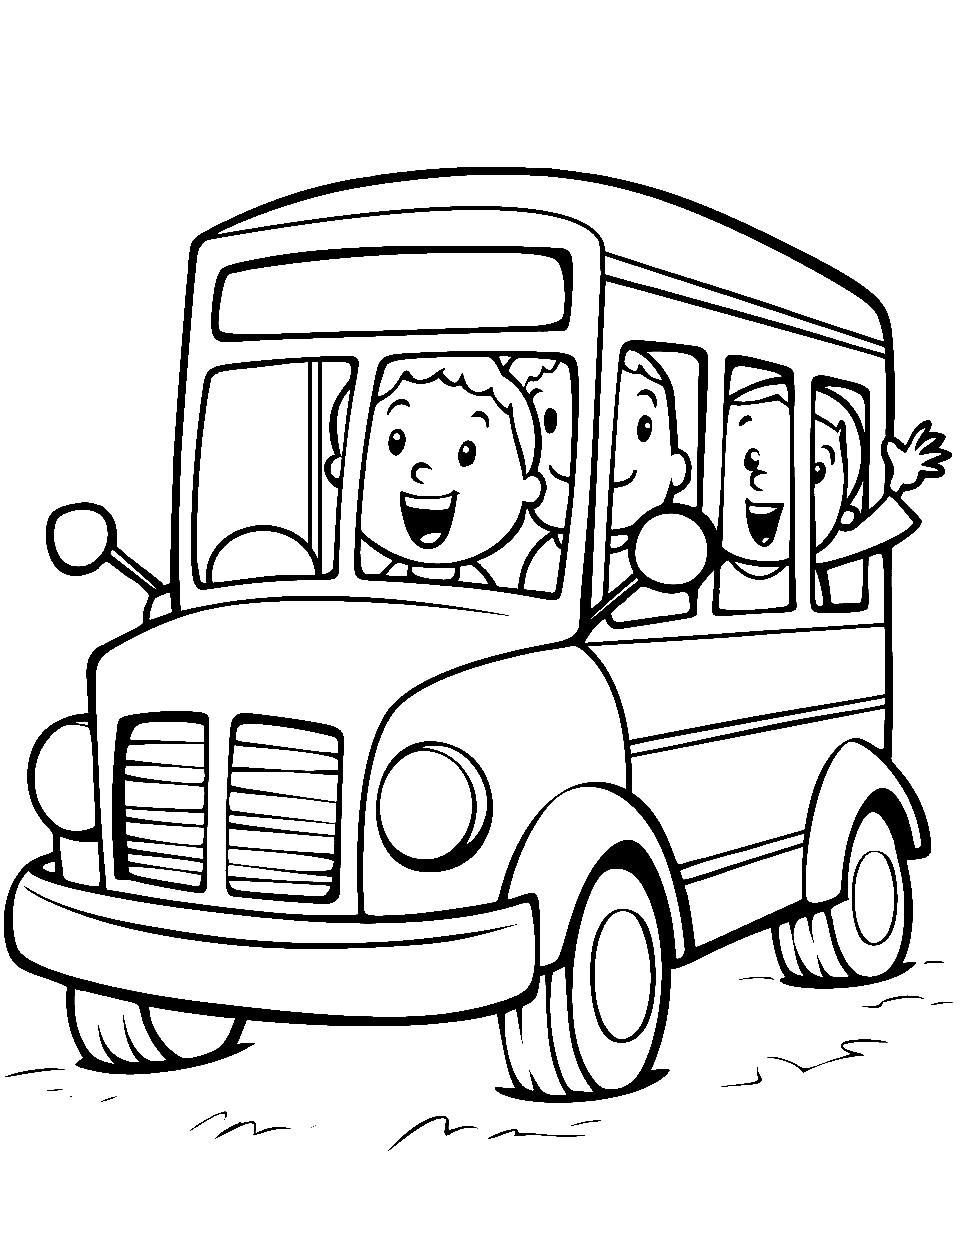 Back to School Bliss Coloring Page - A school bus with happy children waving from the windows.